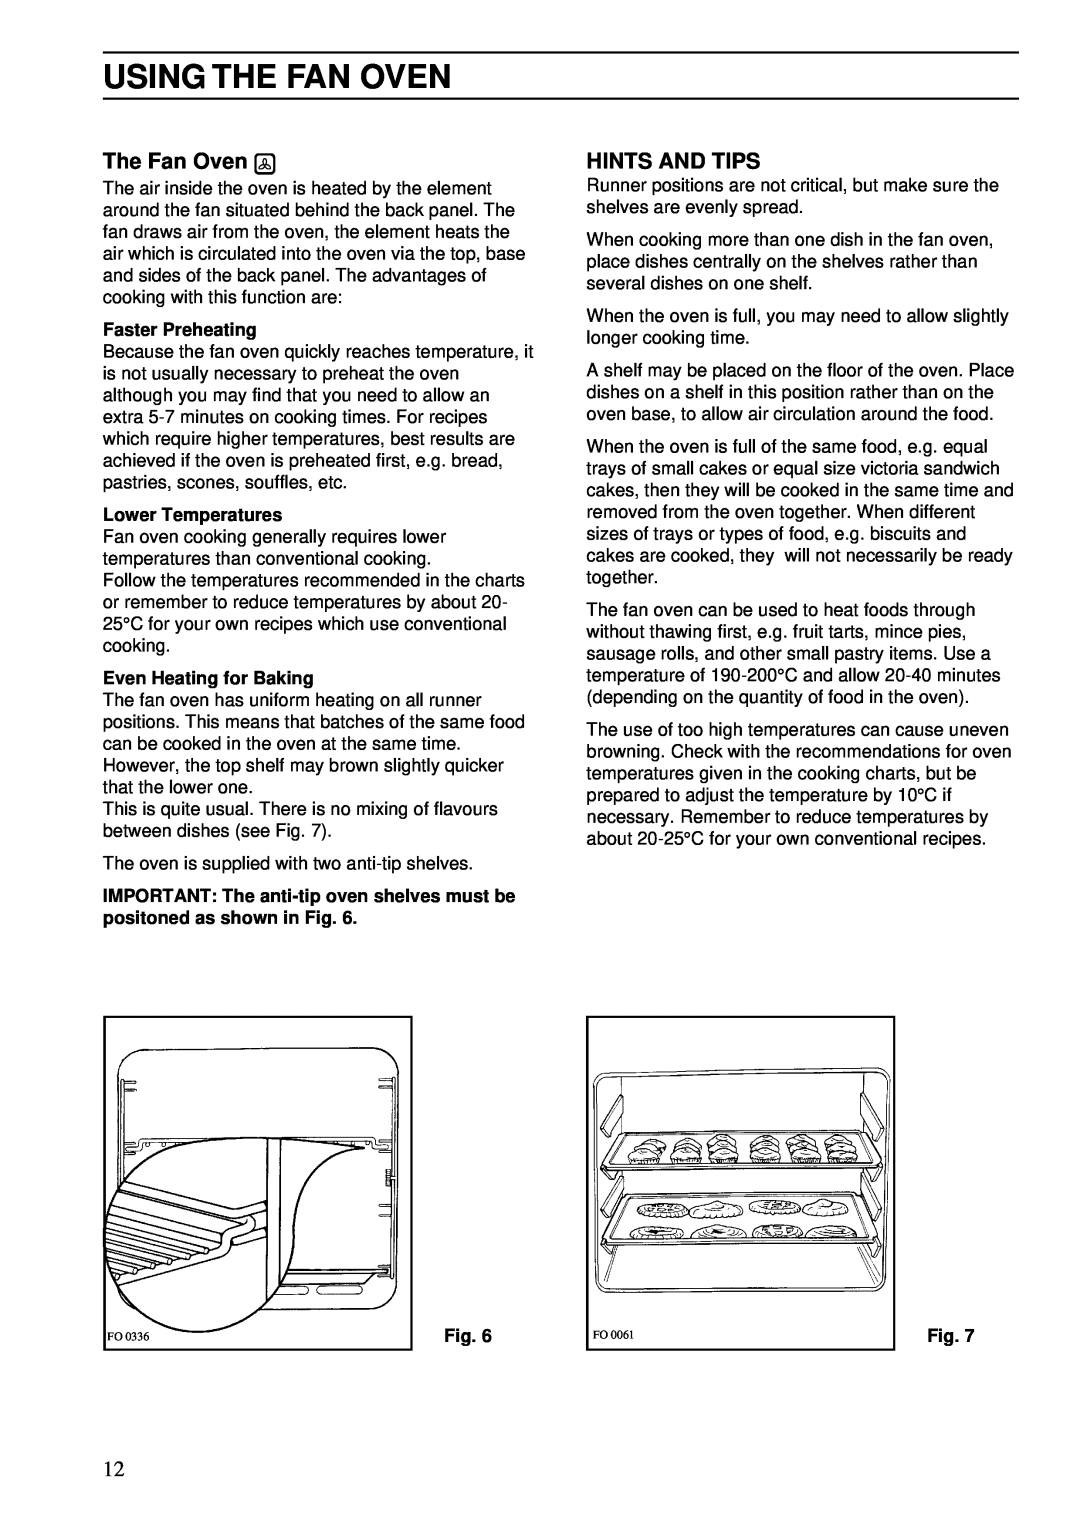 Zanussi ZSA 15 installation manual Using The Fan Oven, Hints And Tips 